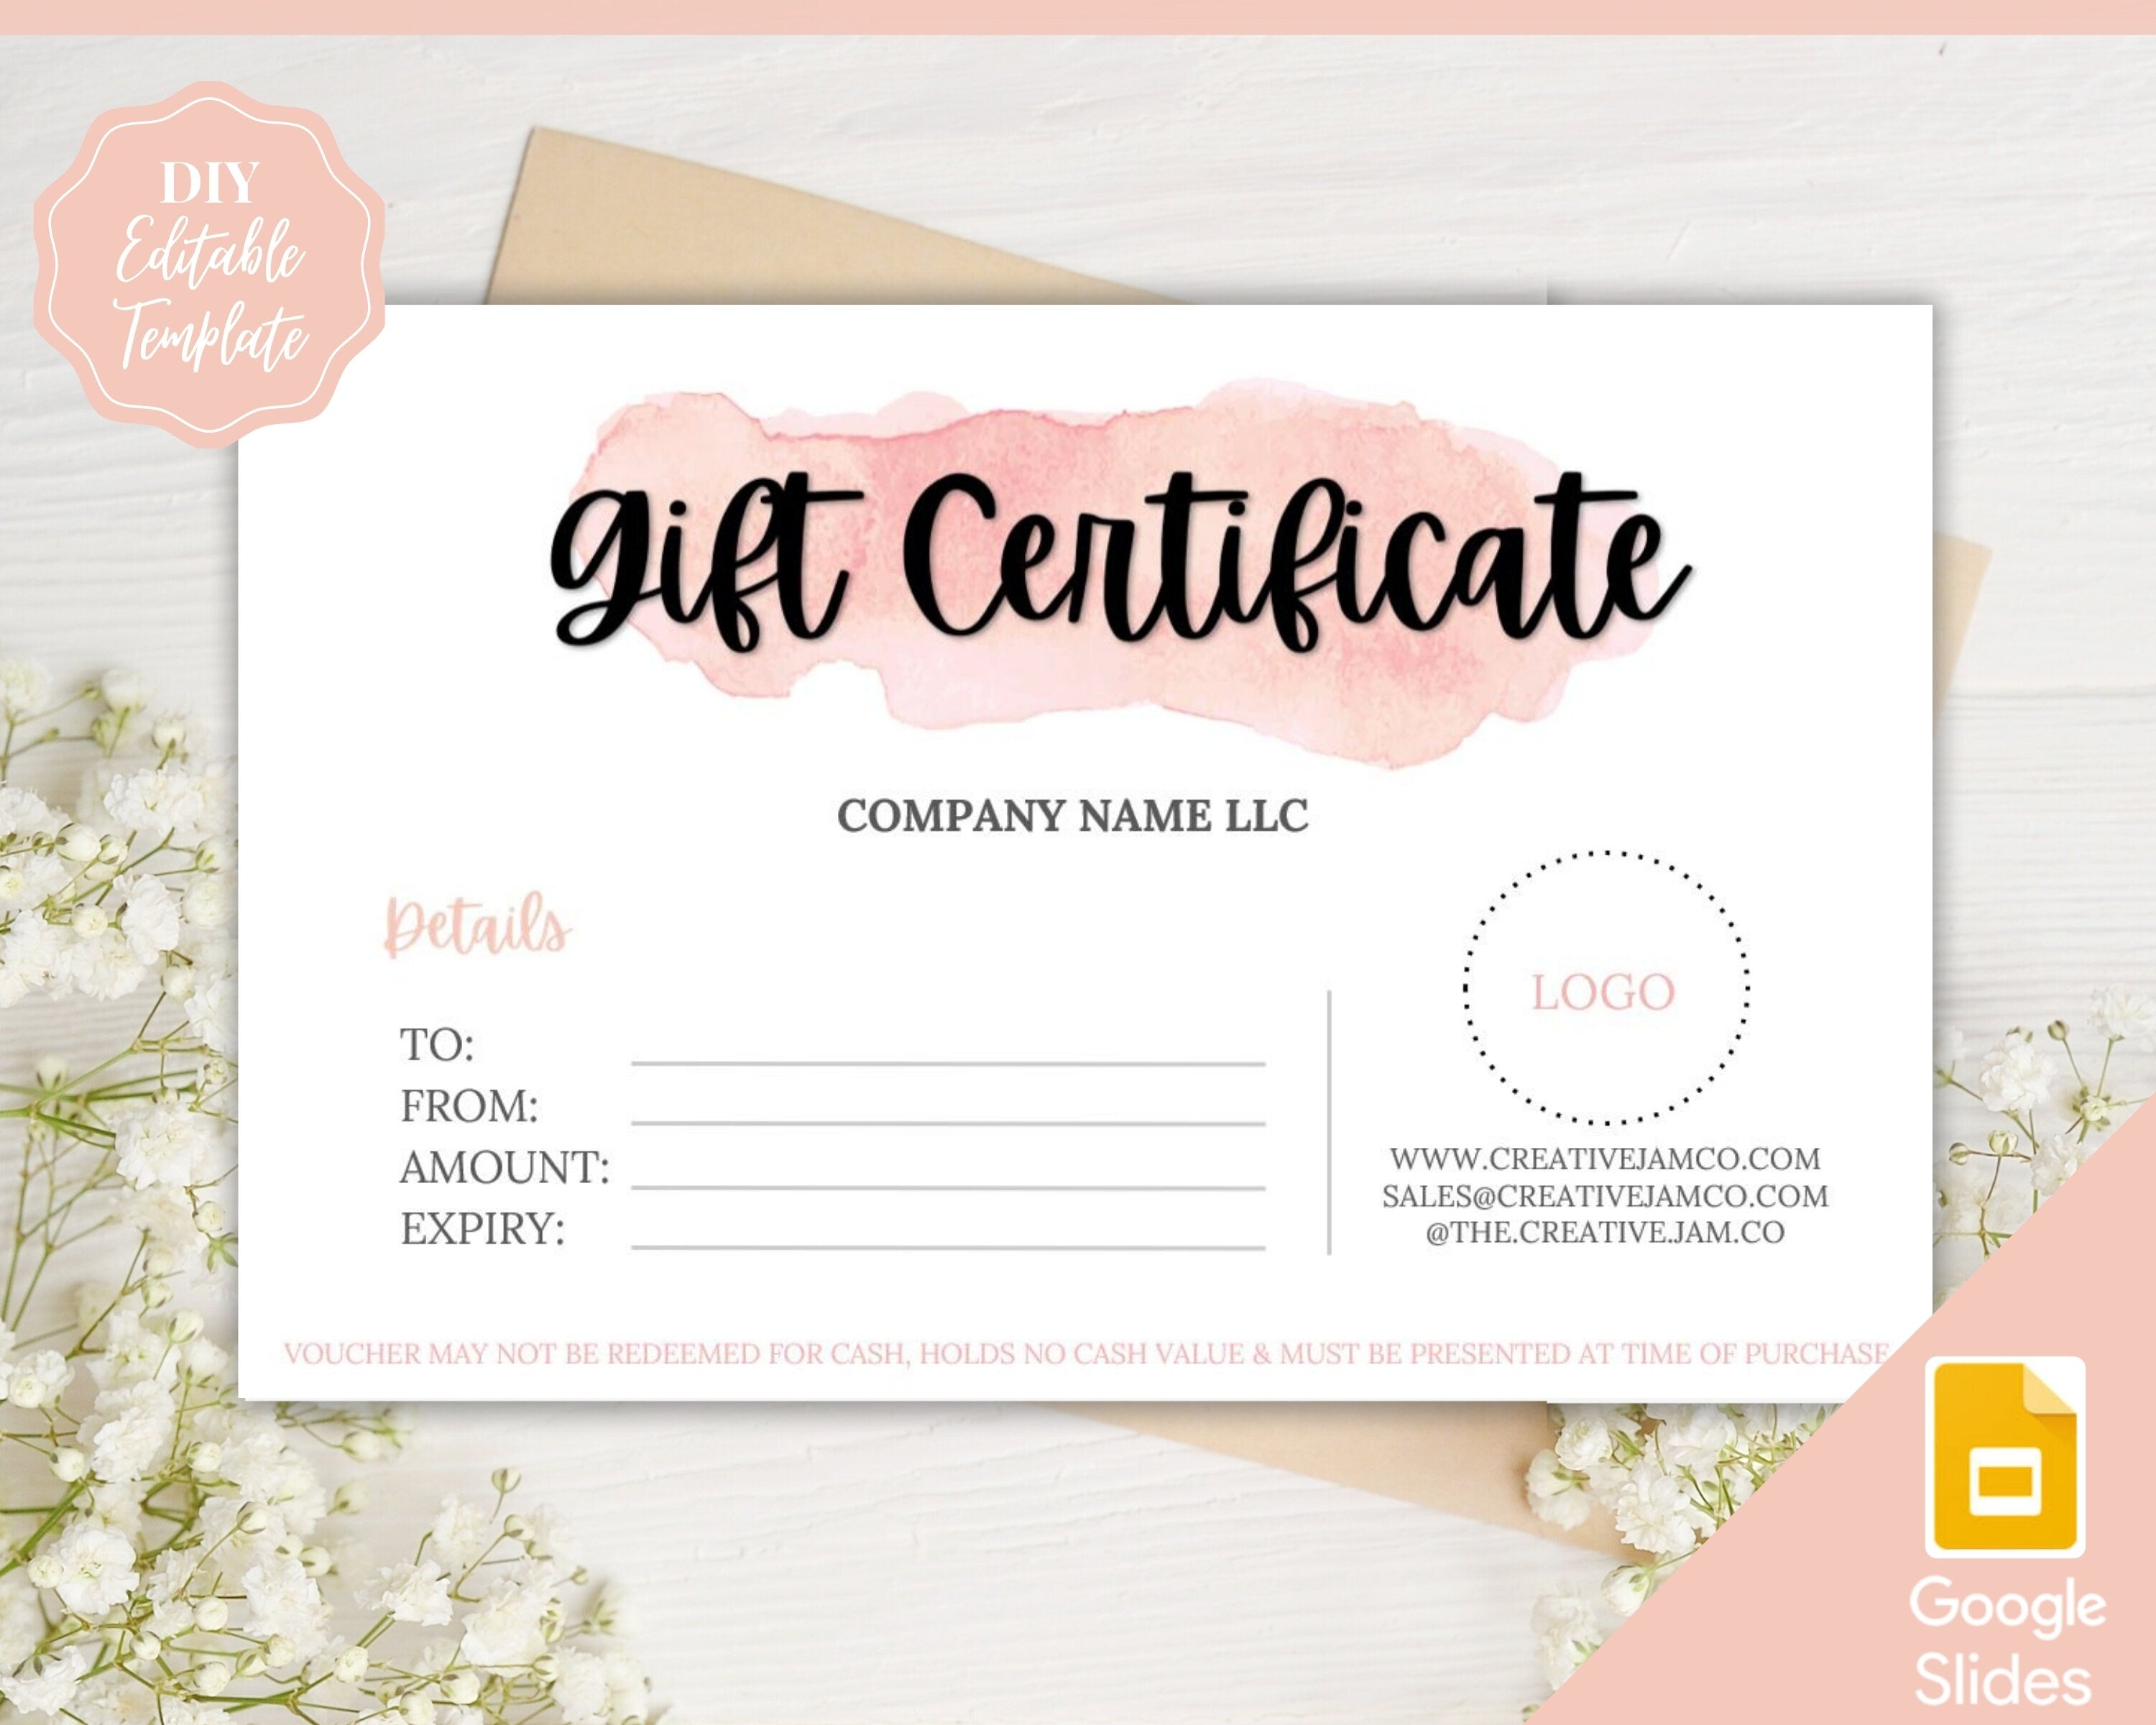 Gift Certificate Templates & Ideas